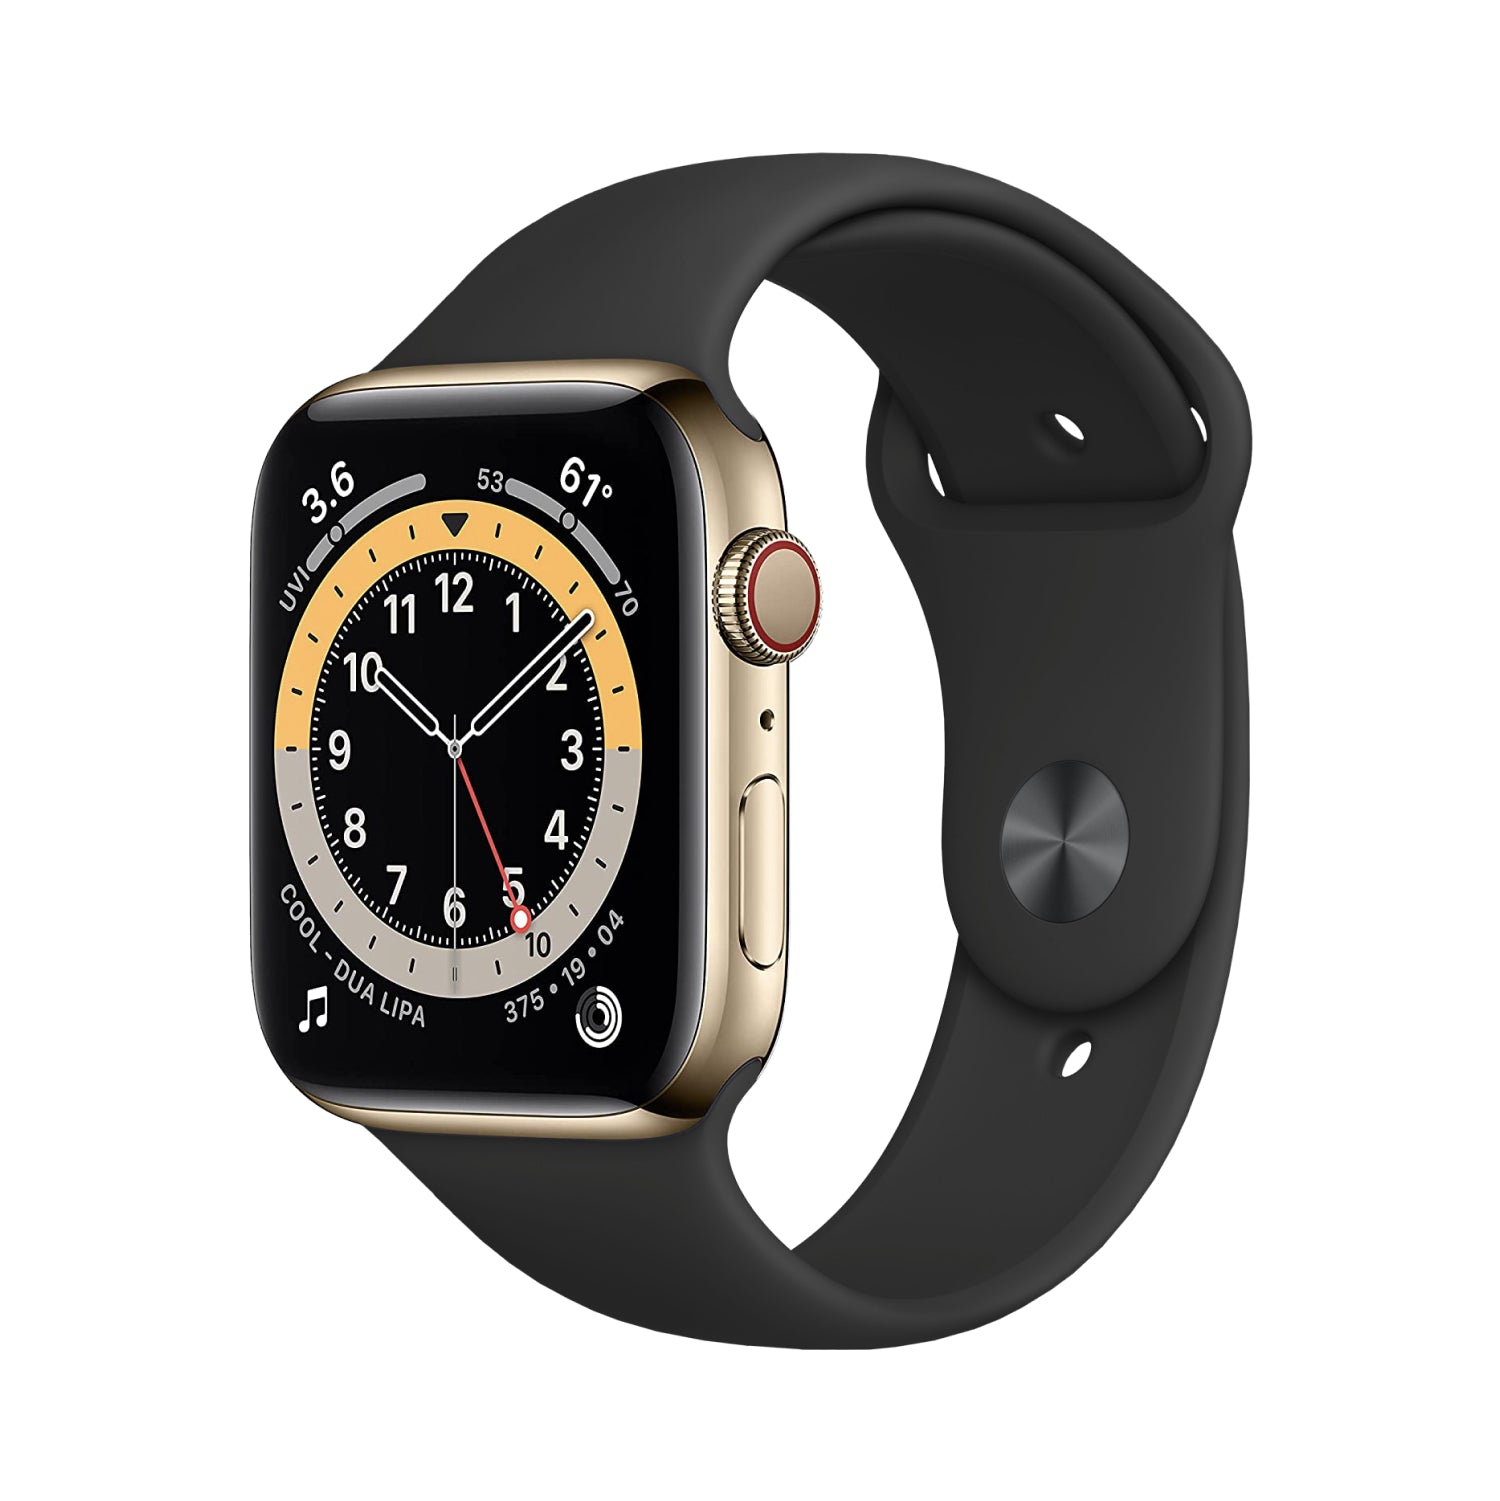 Apple Watch Series 6 Stainless 40mm - Cellular